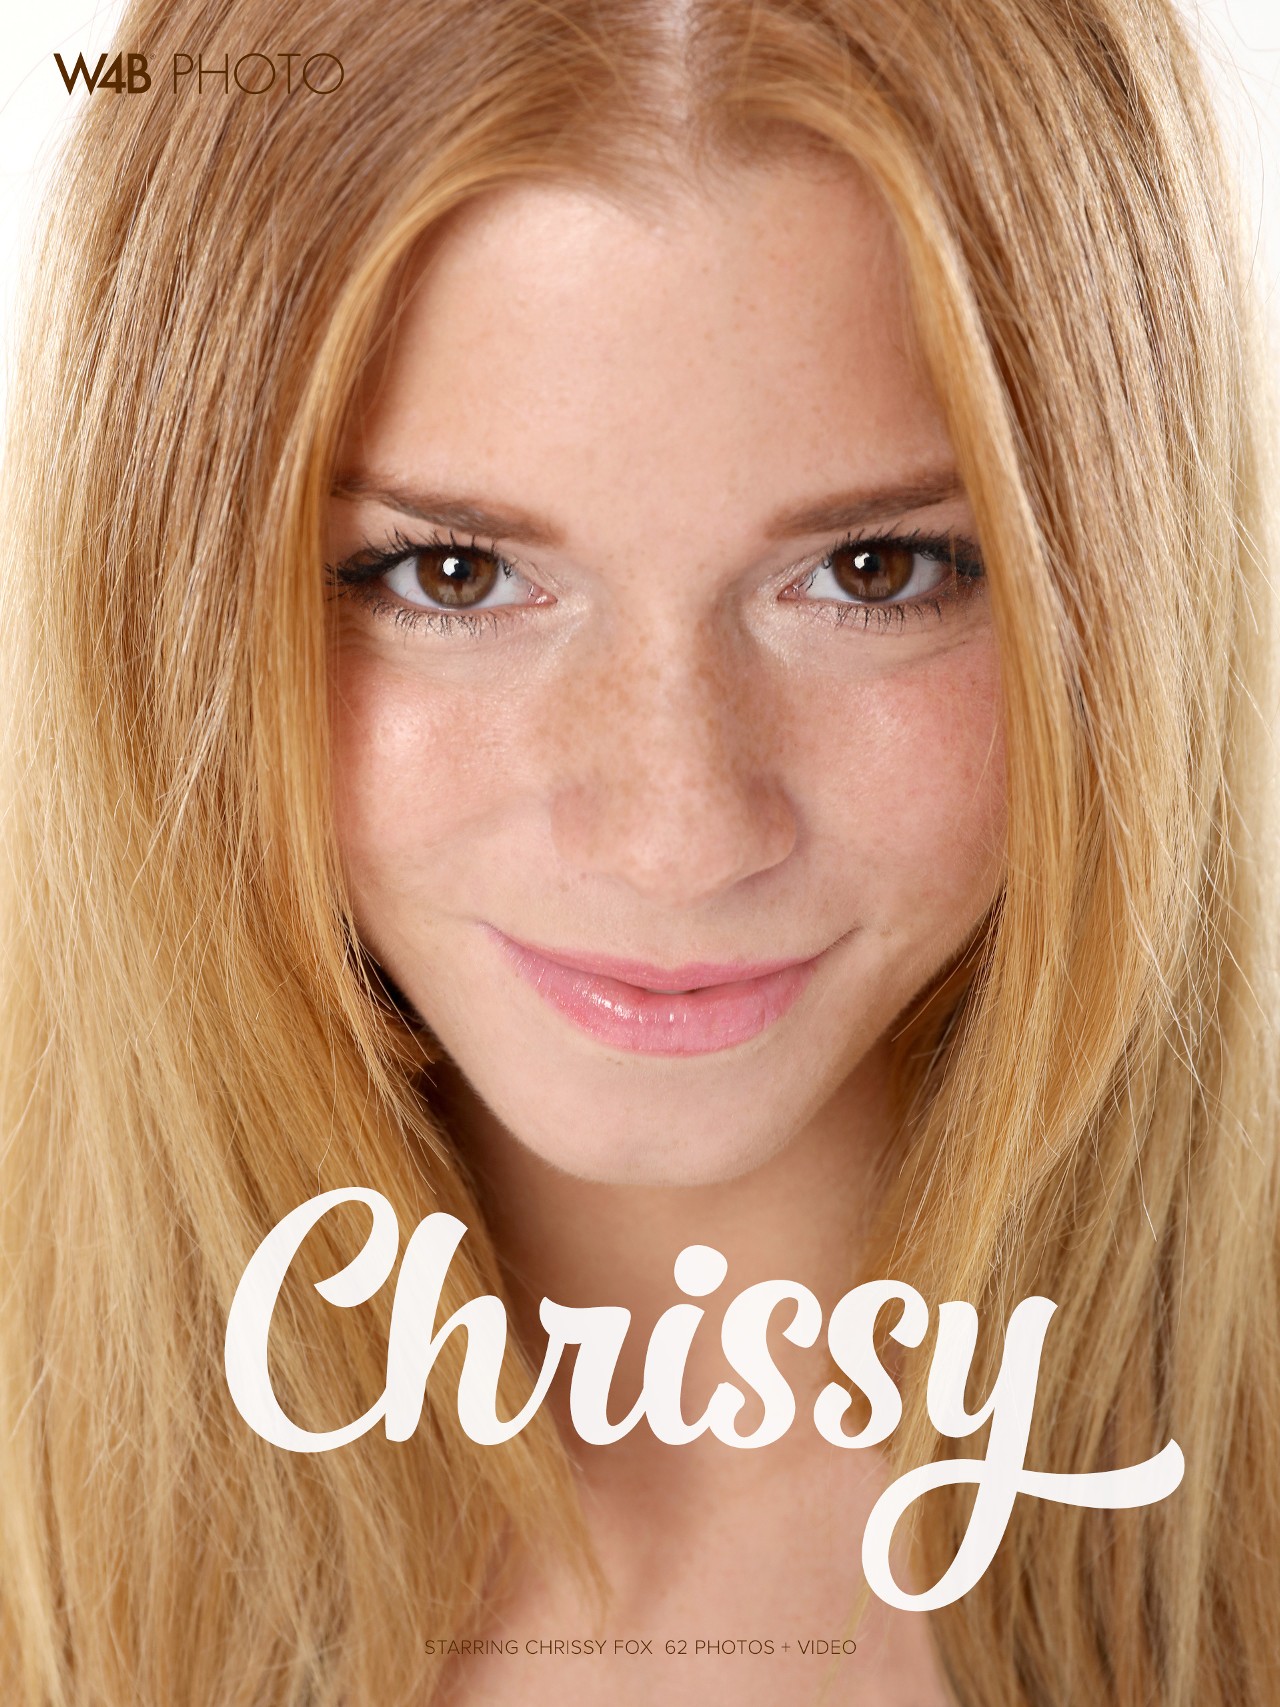 Watch4Beauty is happy to bring you a brand new beauty. Her name is Chrissy and we think she may have a lot of potential here! Her rare combination of deep brown eyes, ginger hair and freckles on her lovely face makes her just stunning!